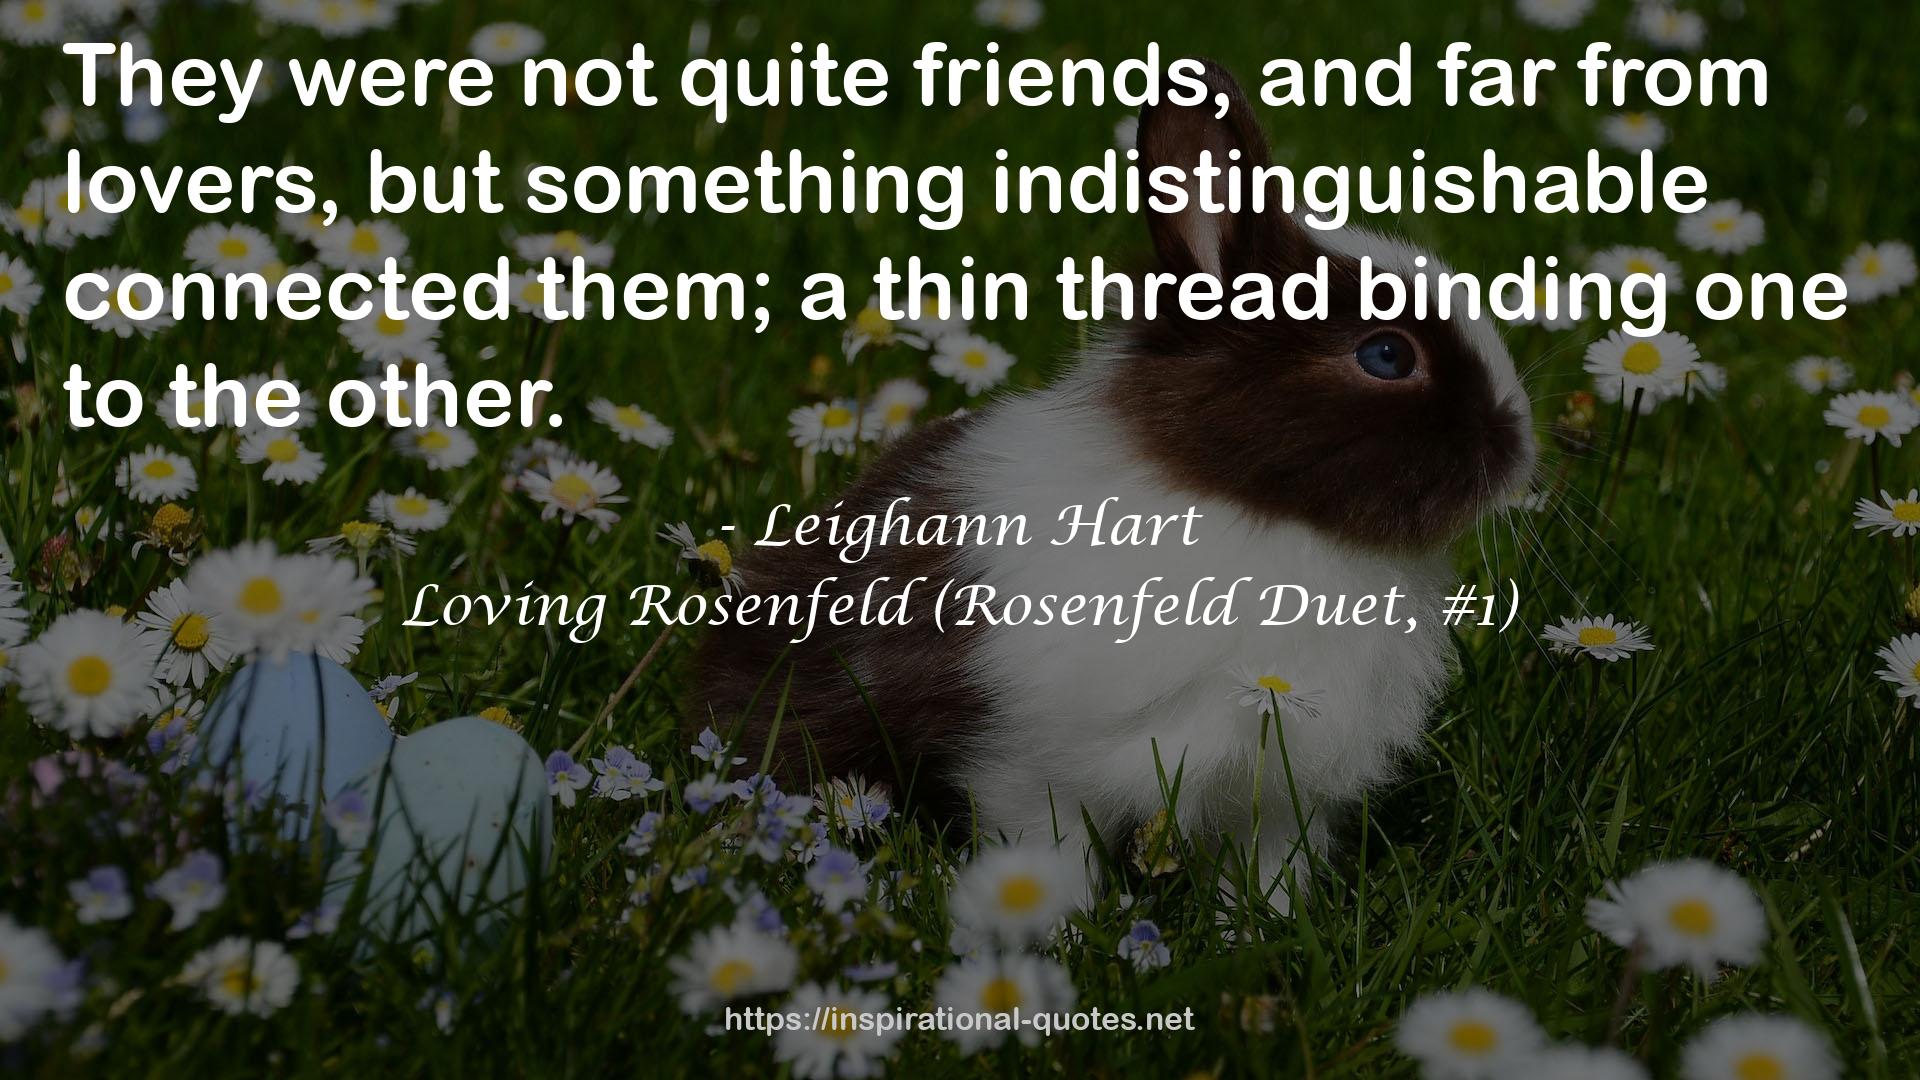 Leighann Hart QUOTES